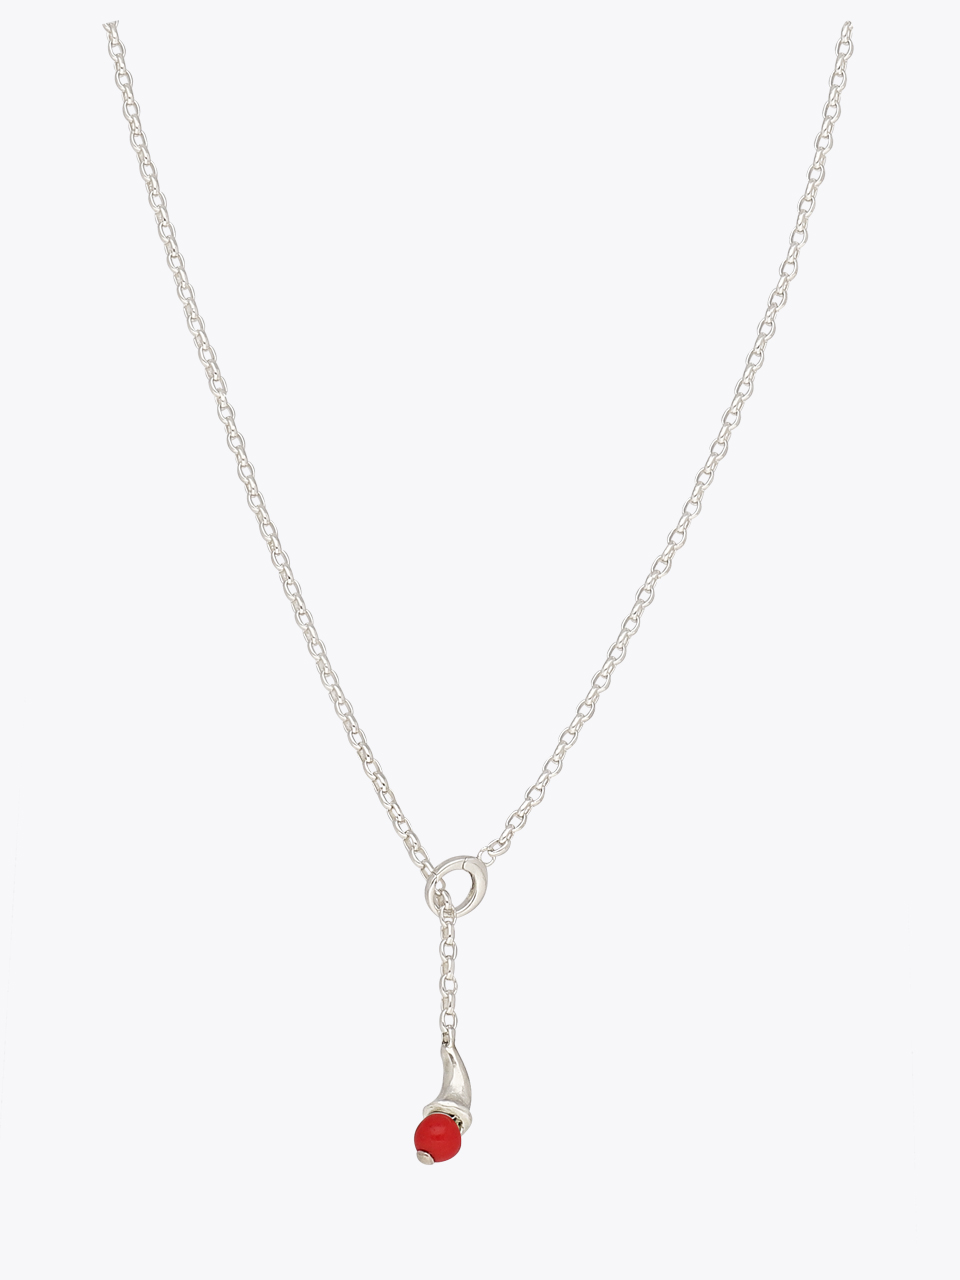 Red bud necklace